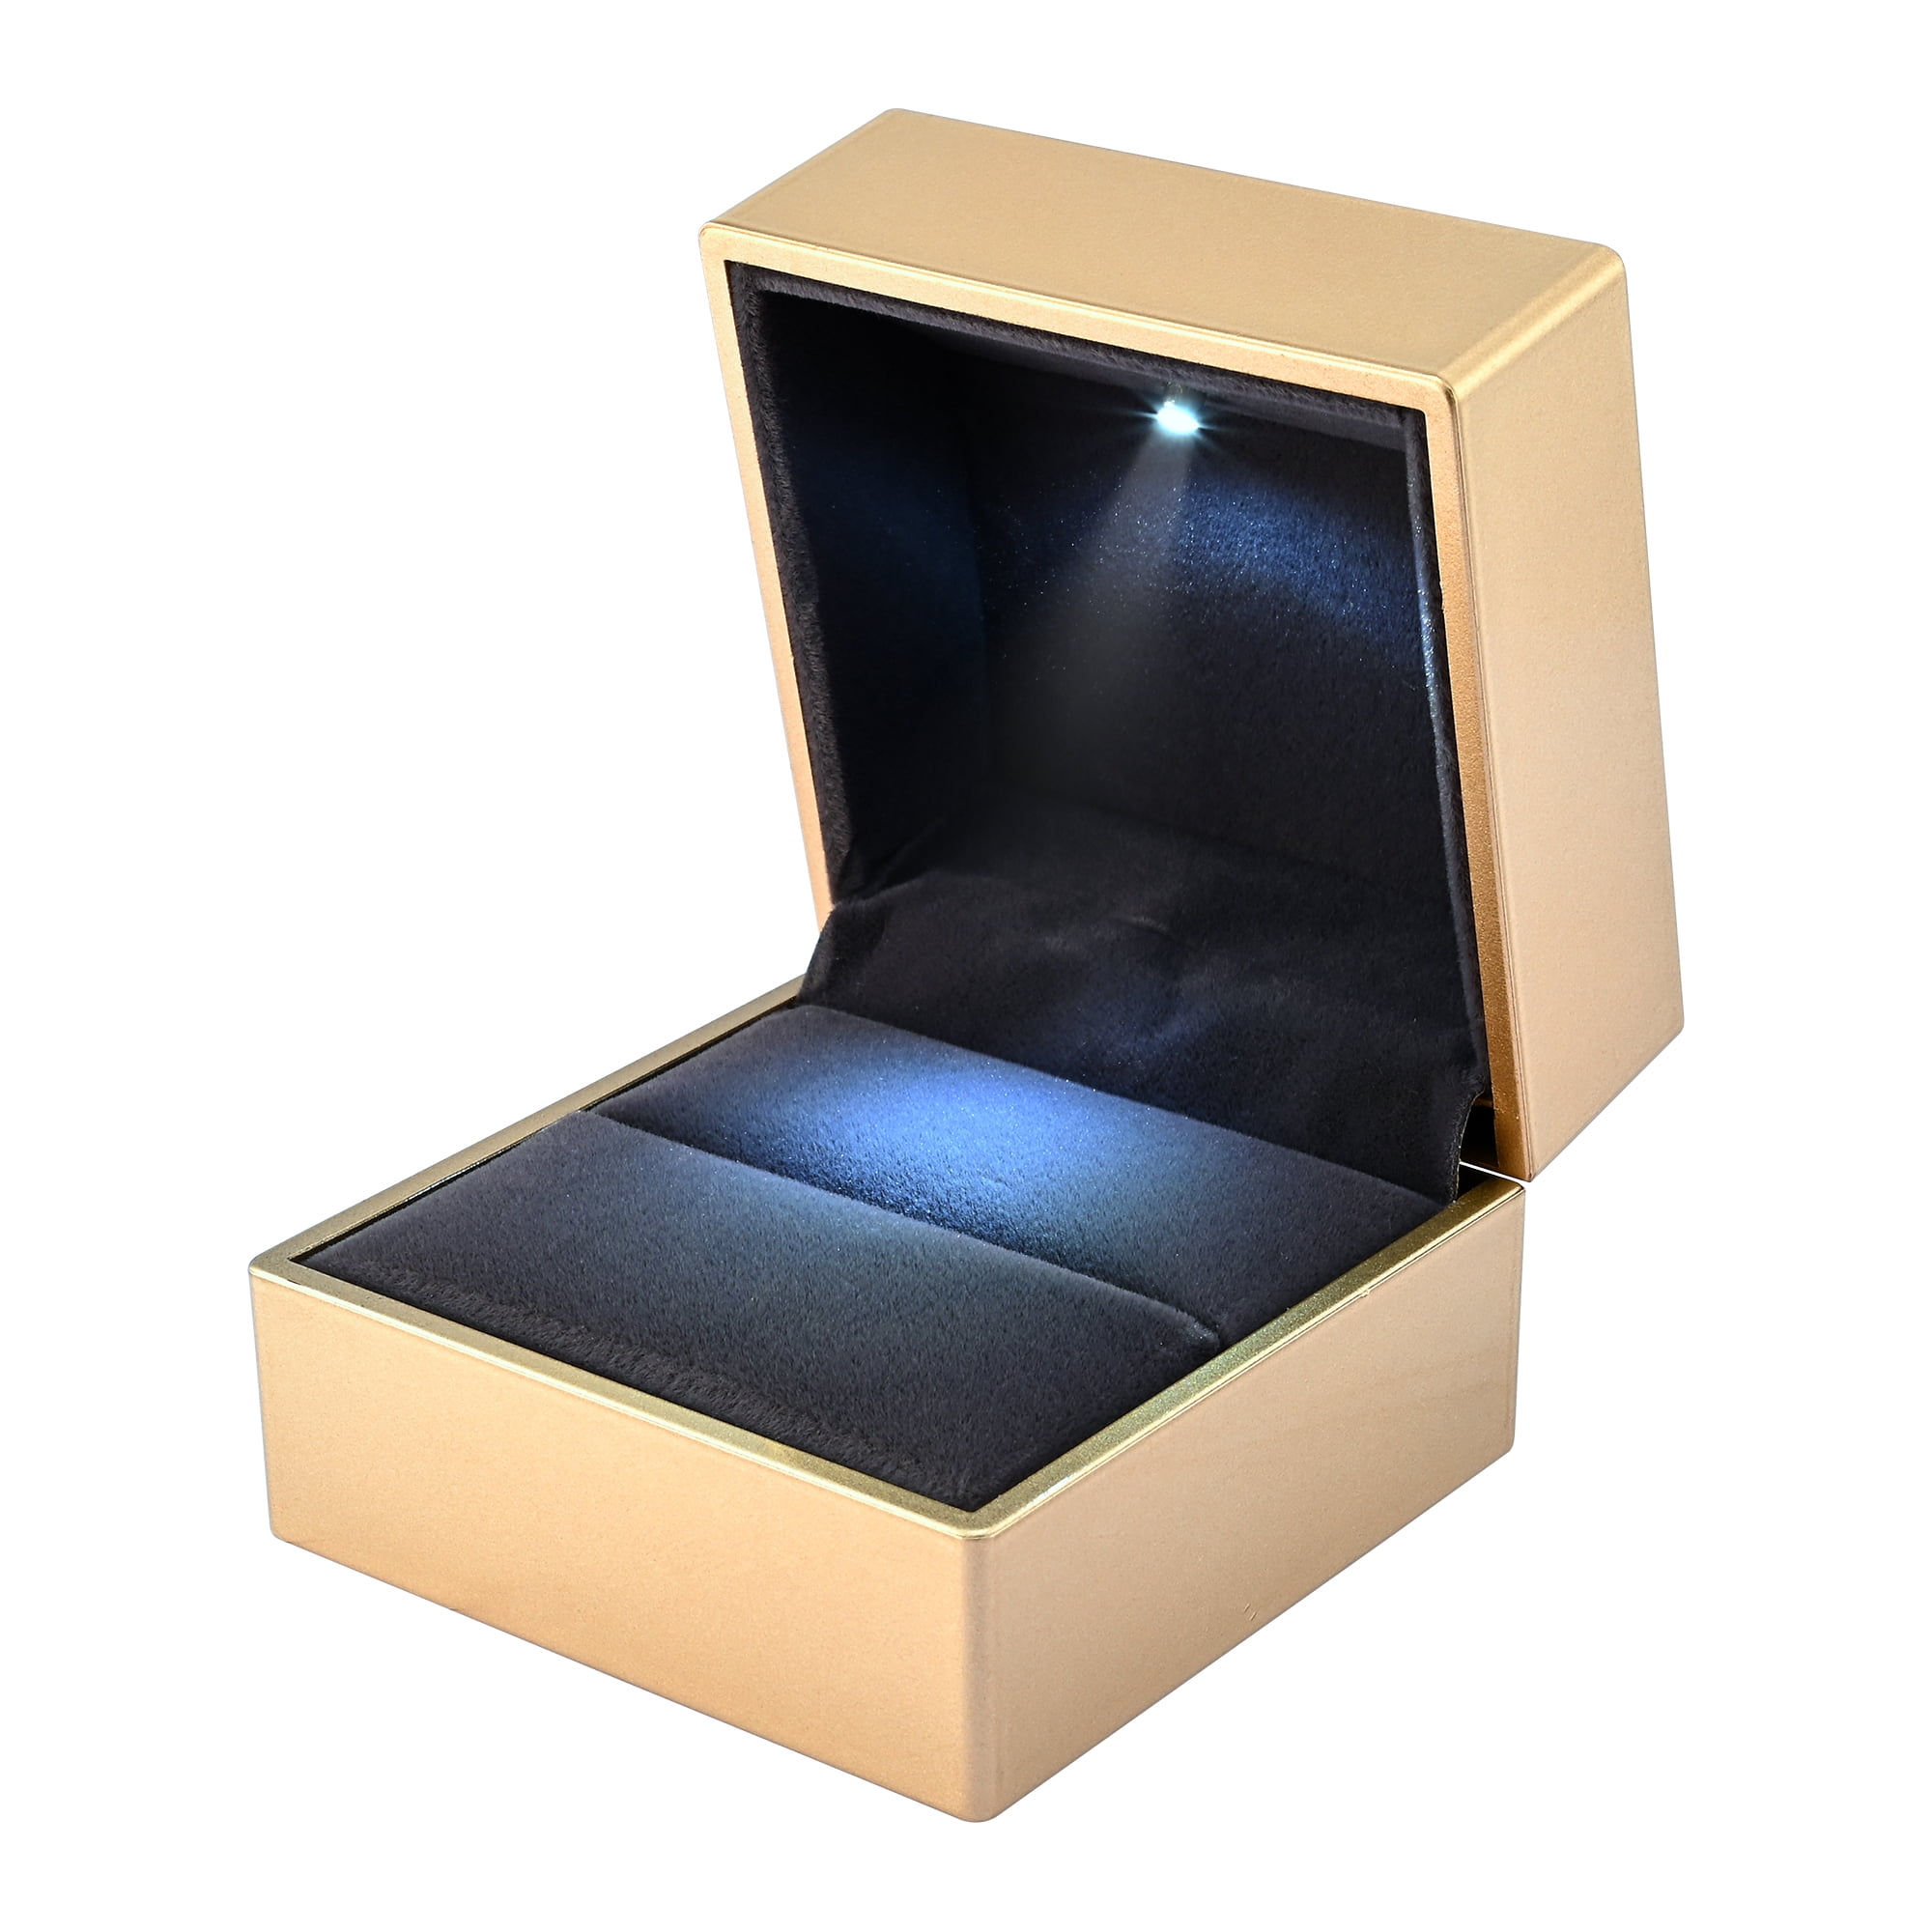 Fancy Wooden Jewelry Storage Box Gift Box Present Case for Proposal Wedding 